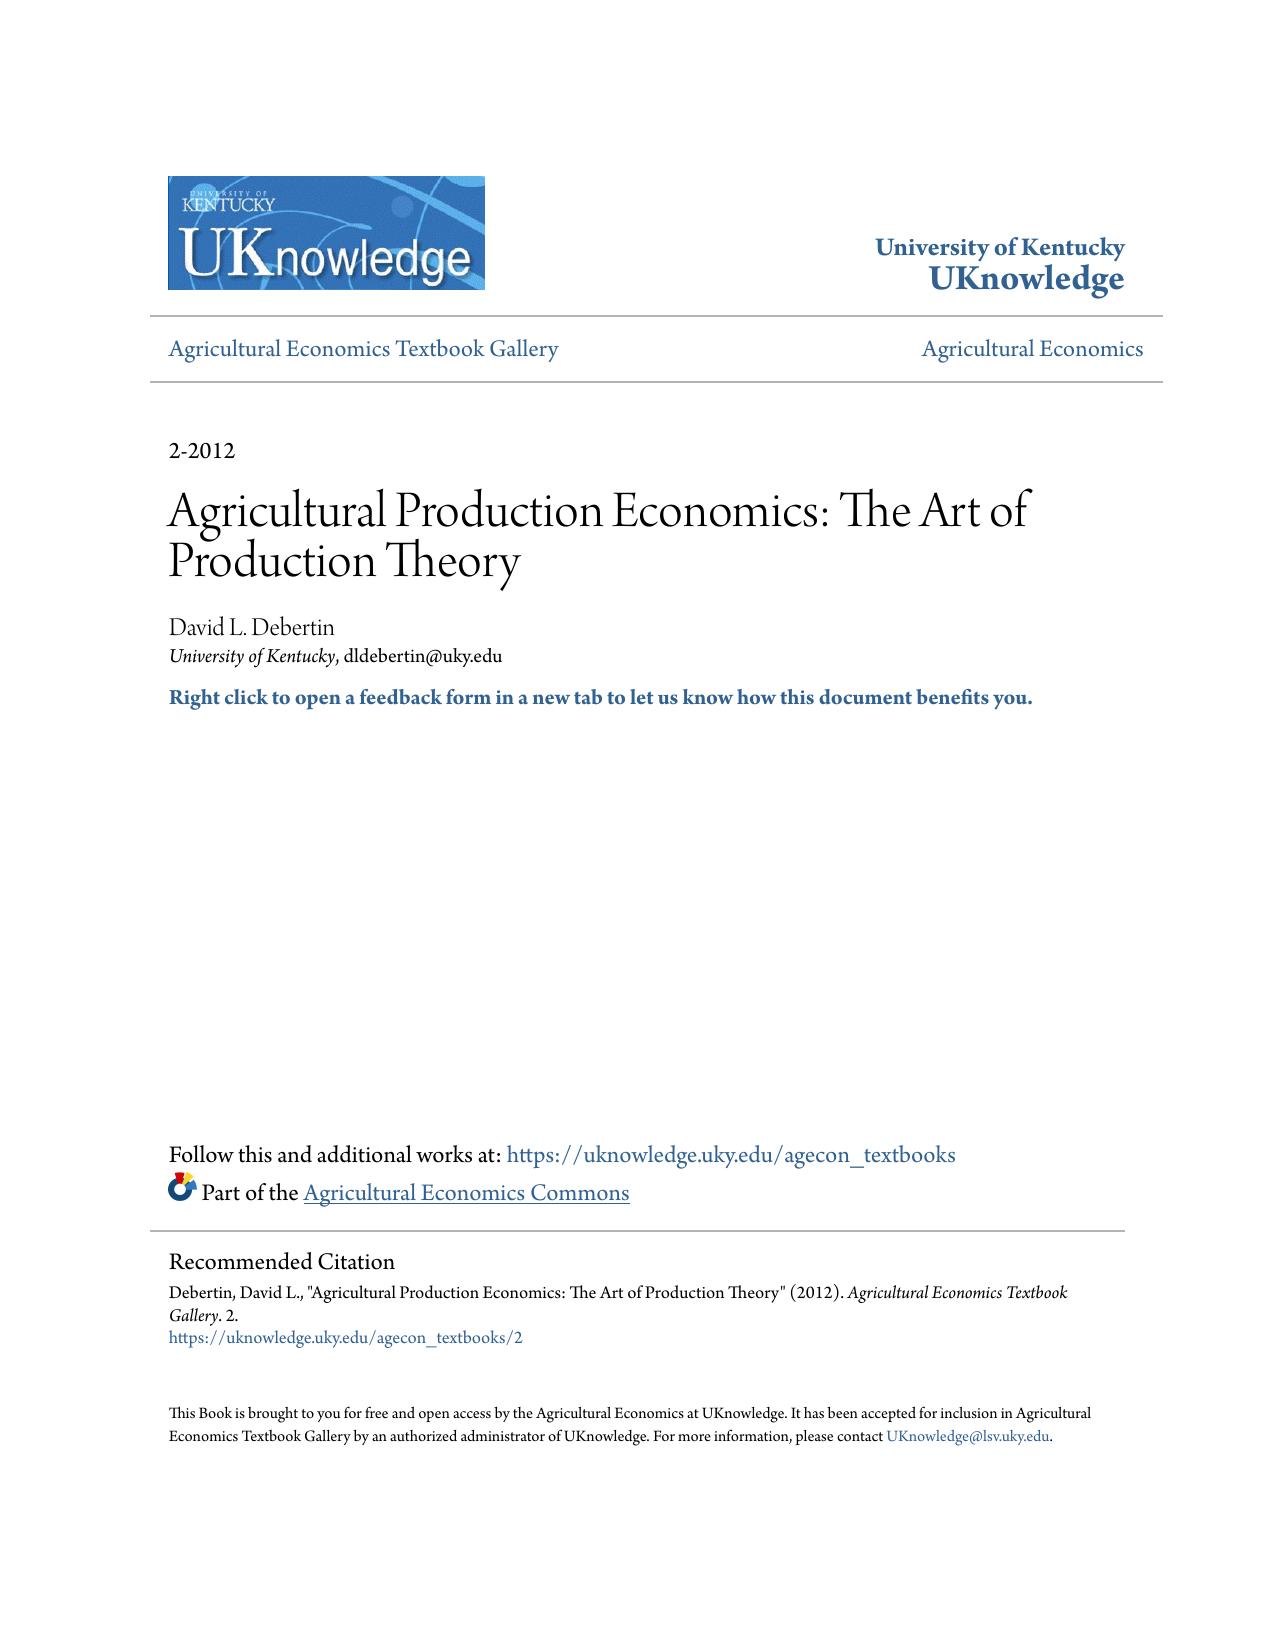 Agricultural Production Economics: The Art of Production Theory